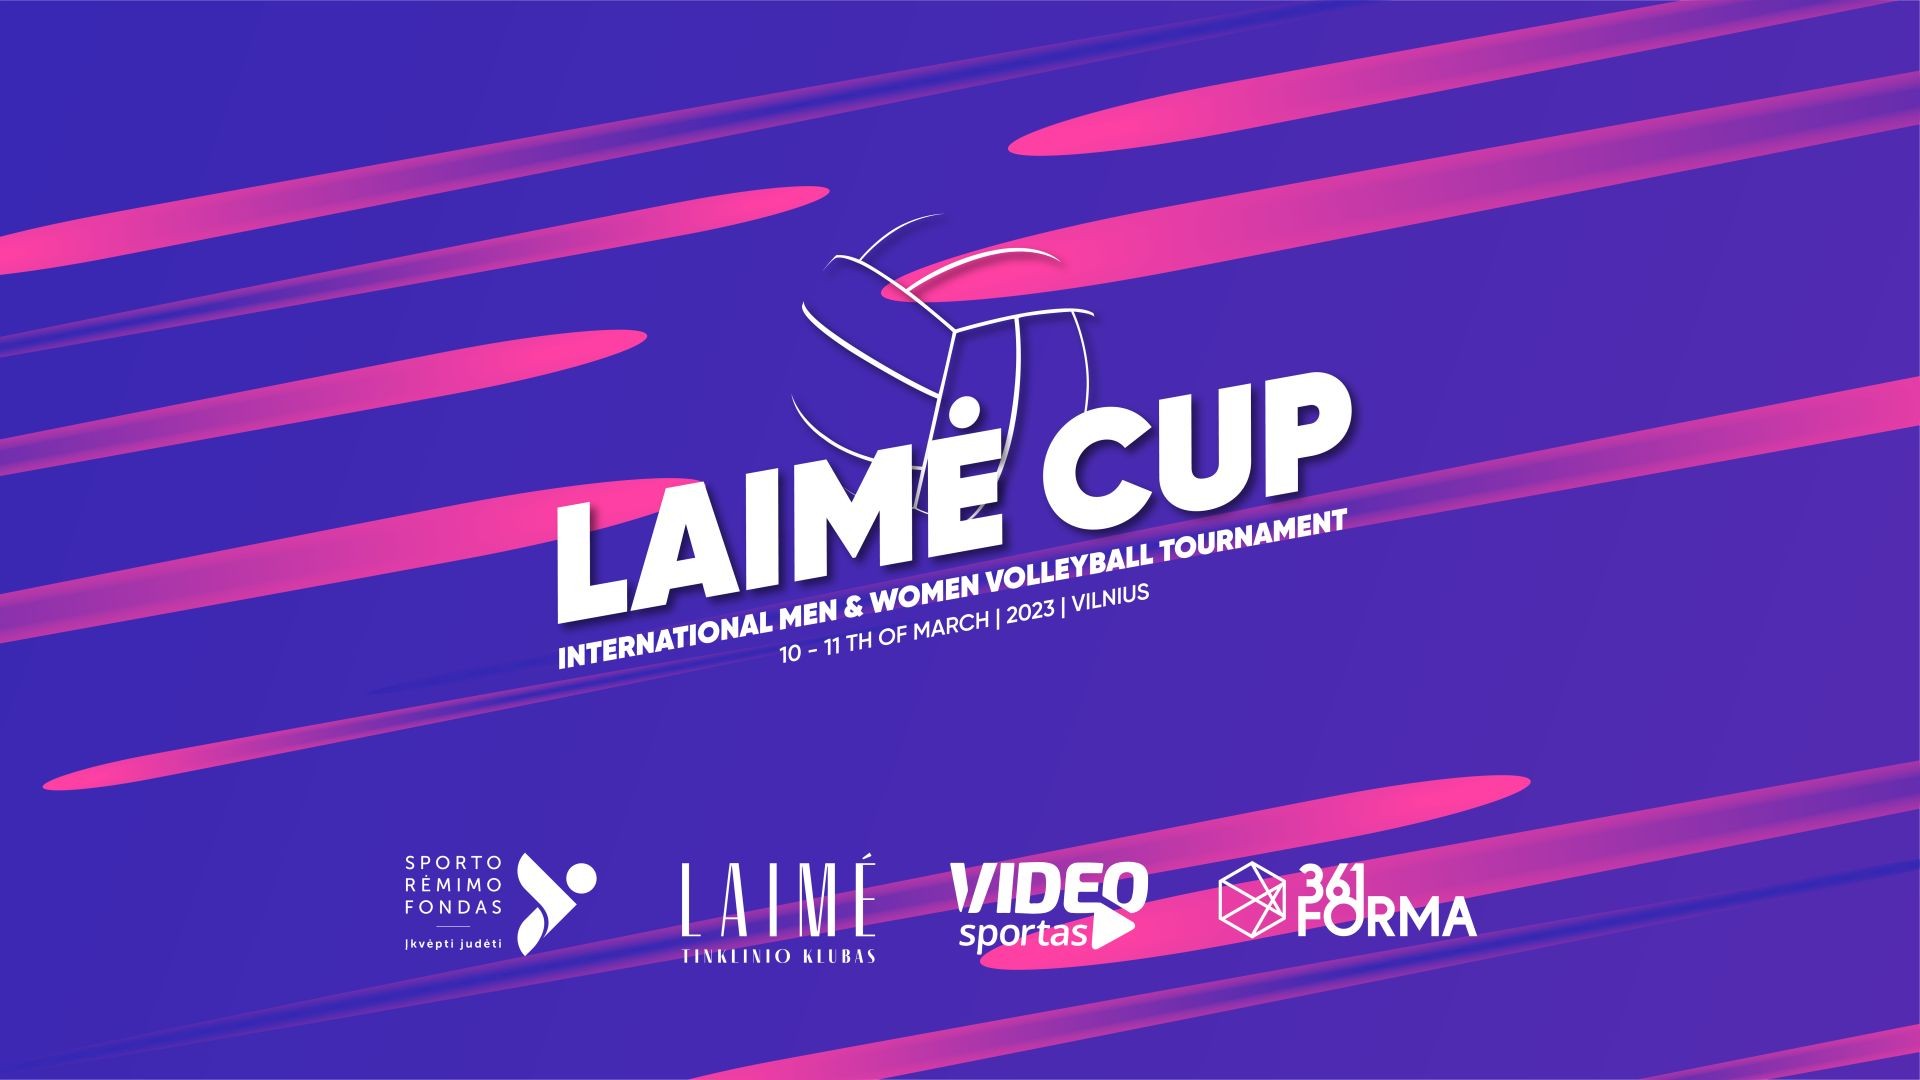 Day 1 | International Men&Women Volleyball Tournament LAIME CUP 2023